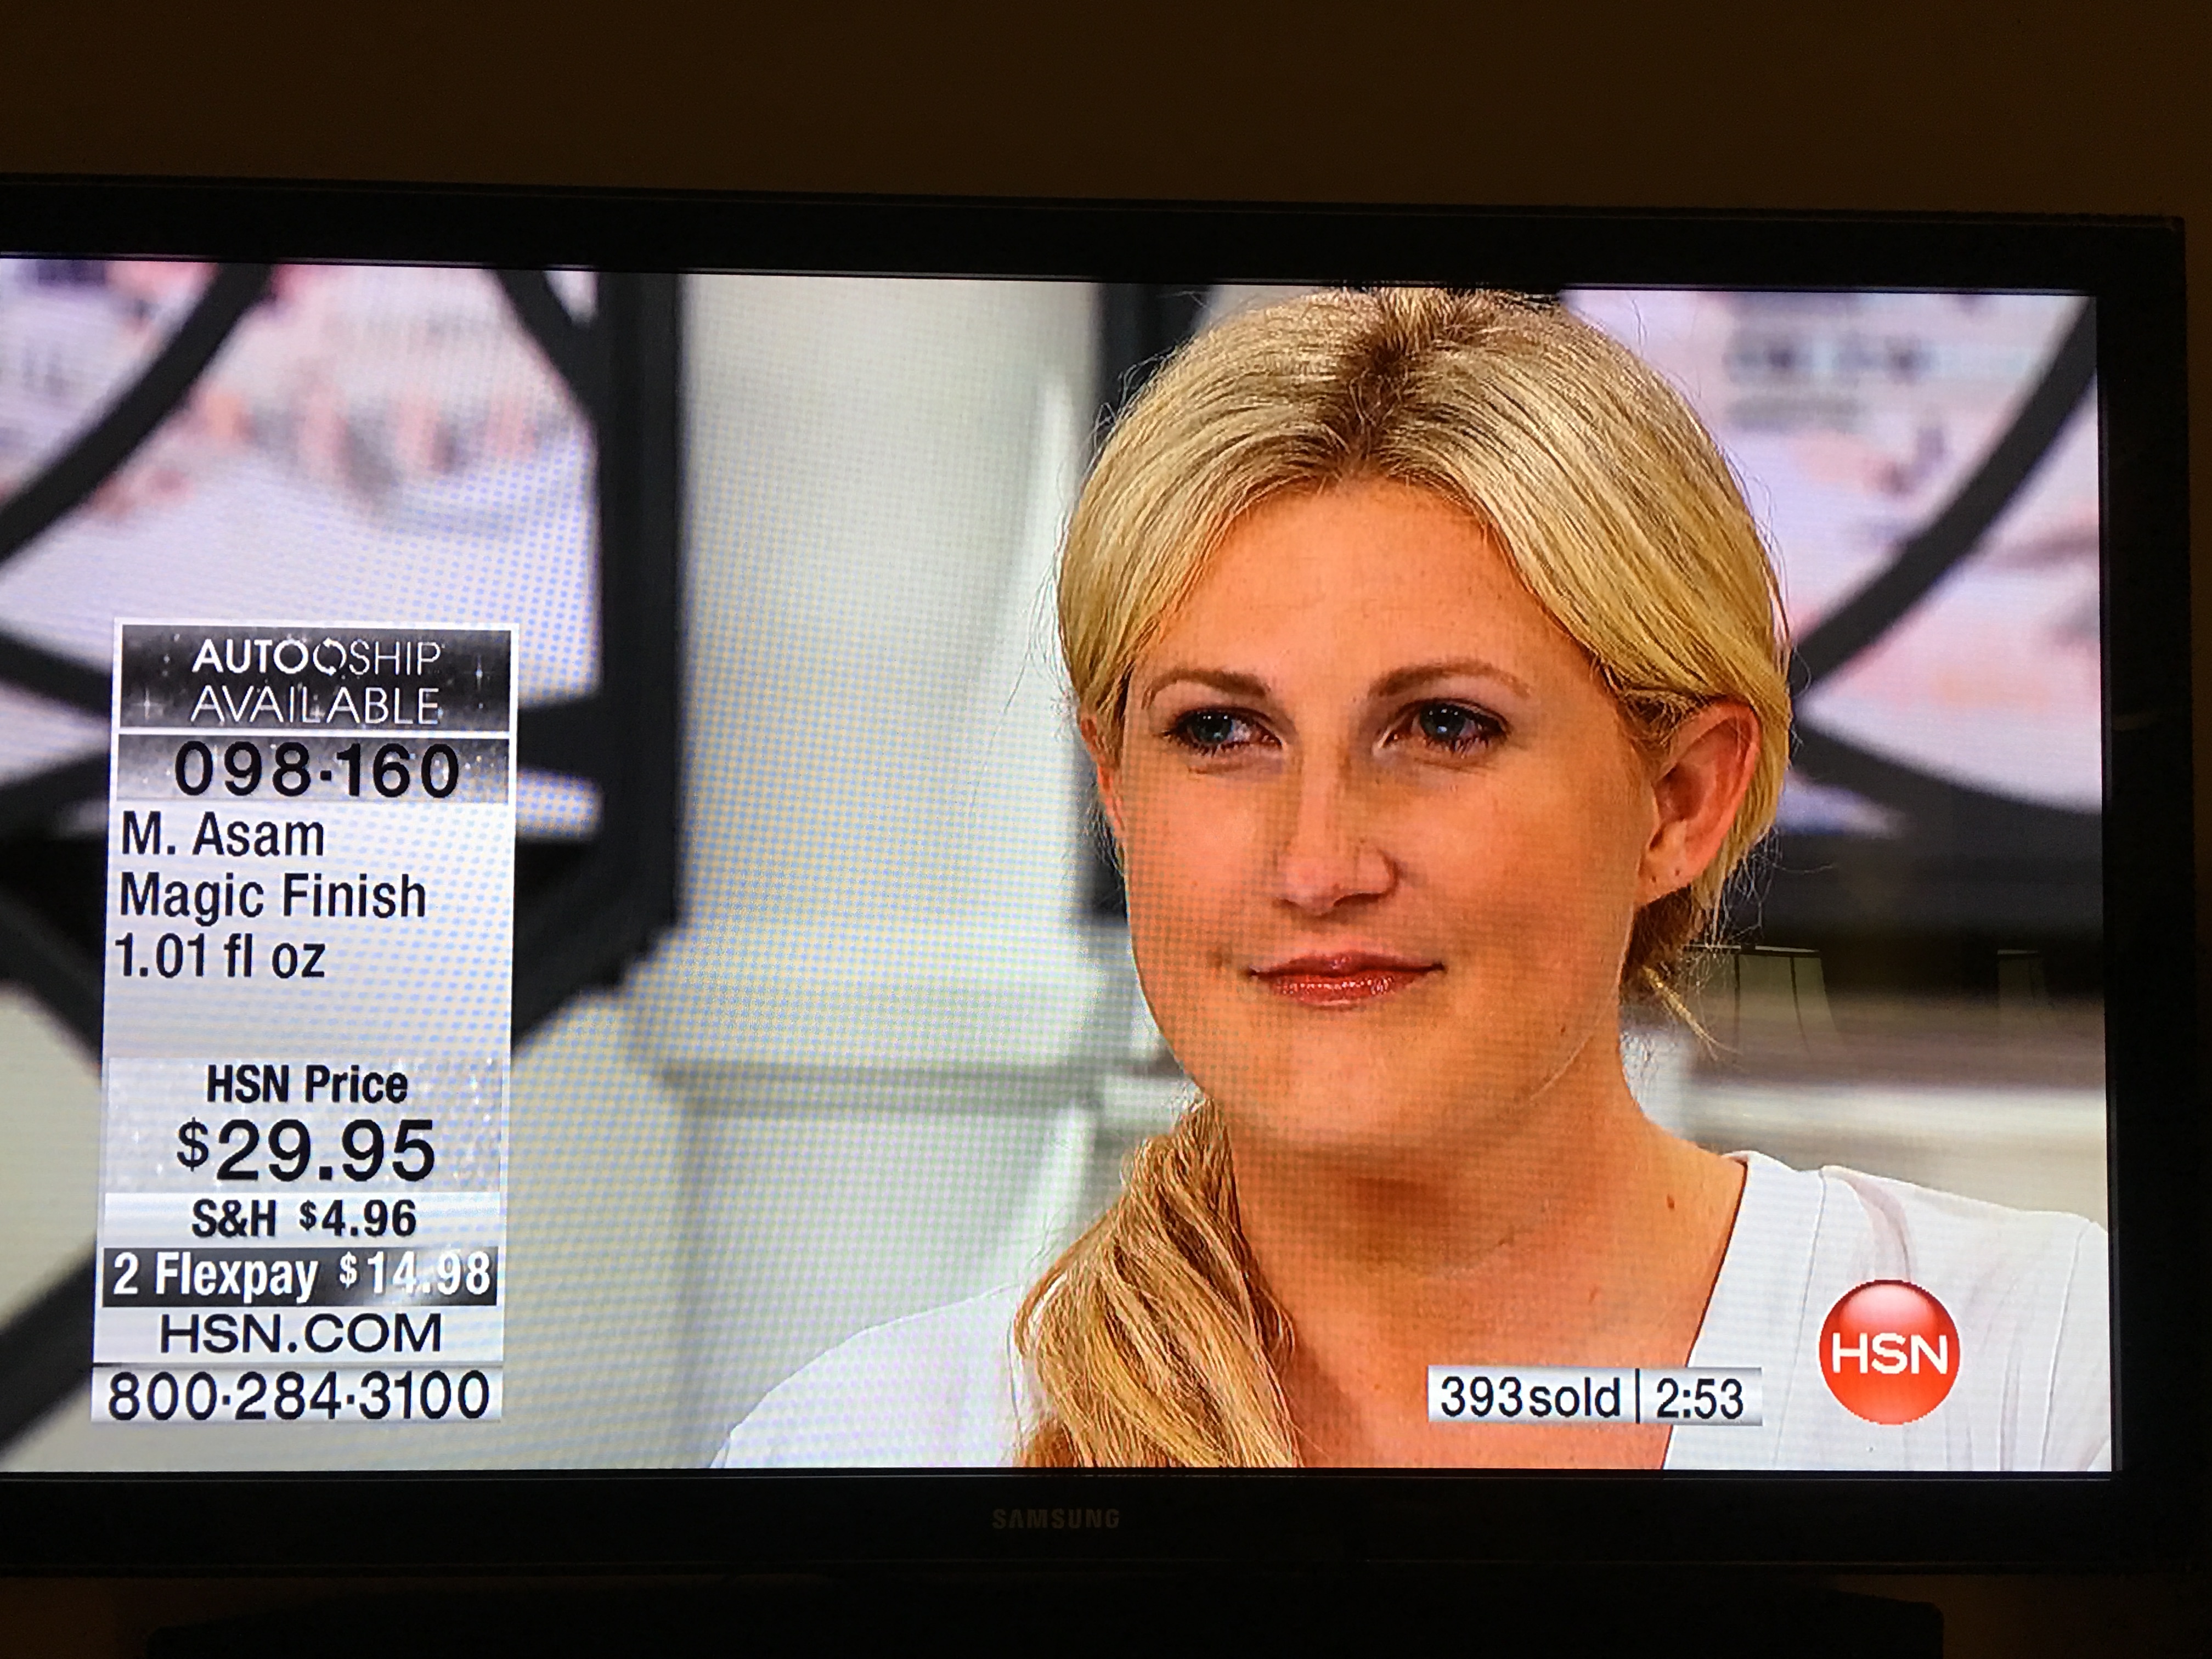 Live Broadcast on National Television Network, HSN. Home Shopping Network.